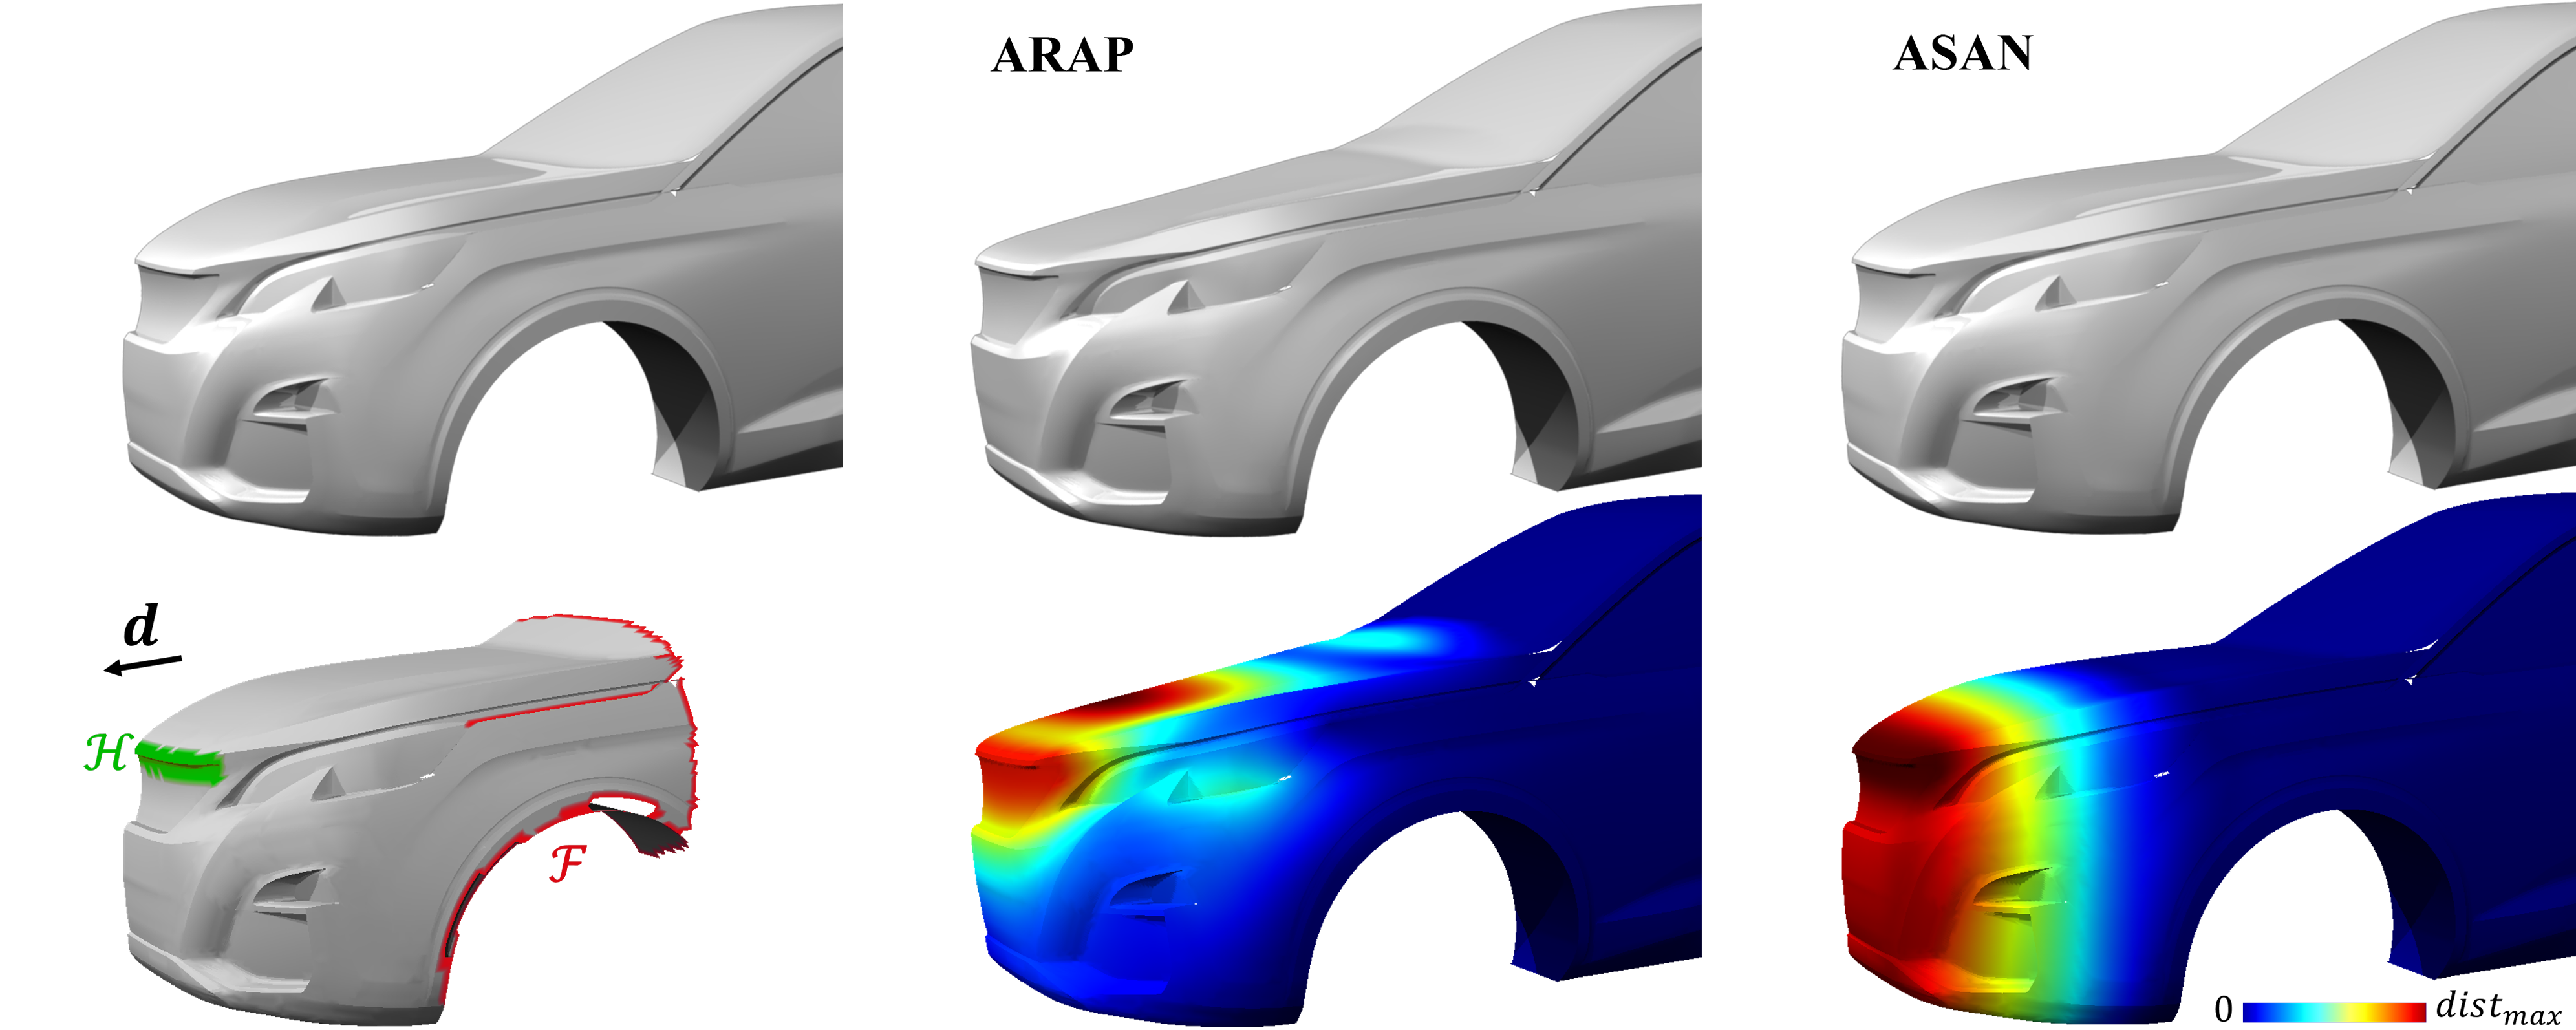 Our method gives a result that stays in the designers’ Mental Shape Space (right) compared to the initial shape (left) and a standard ARAP deformation (middle). Colormap of Euclidean distance to initial mesh.